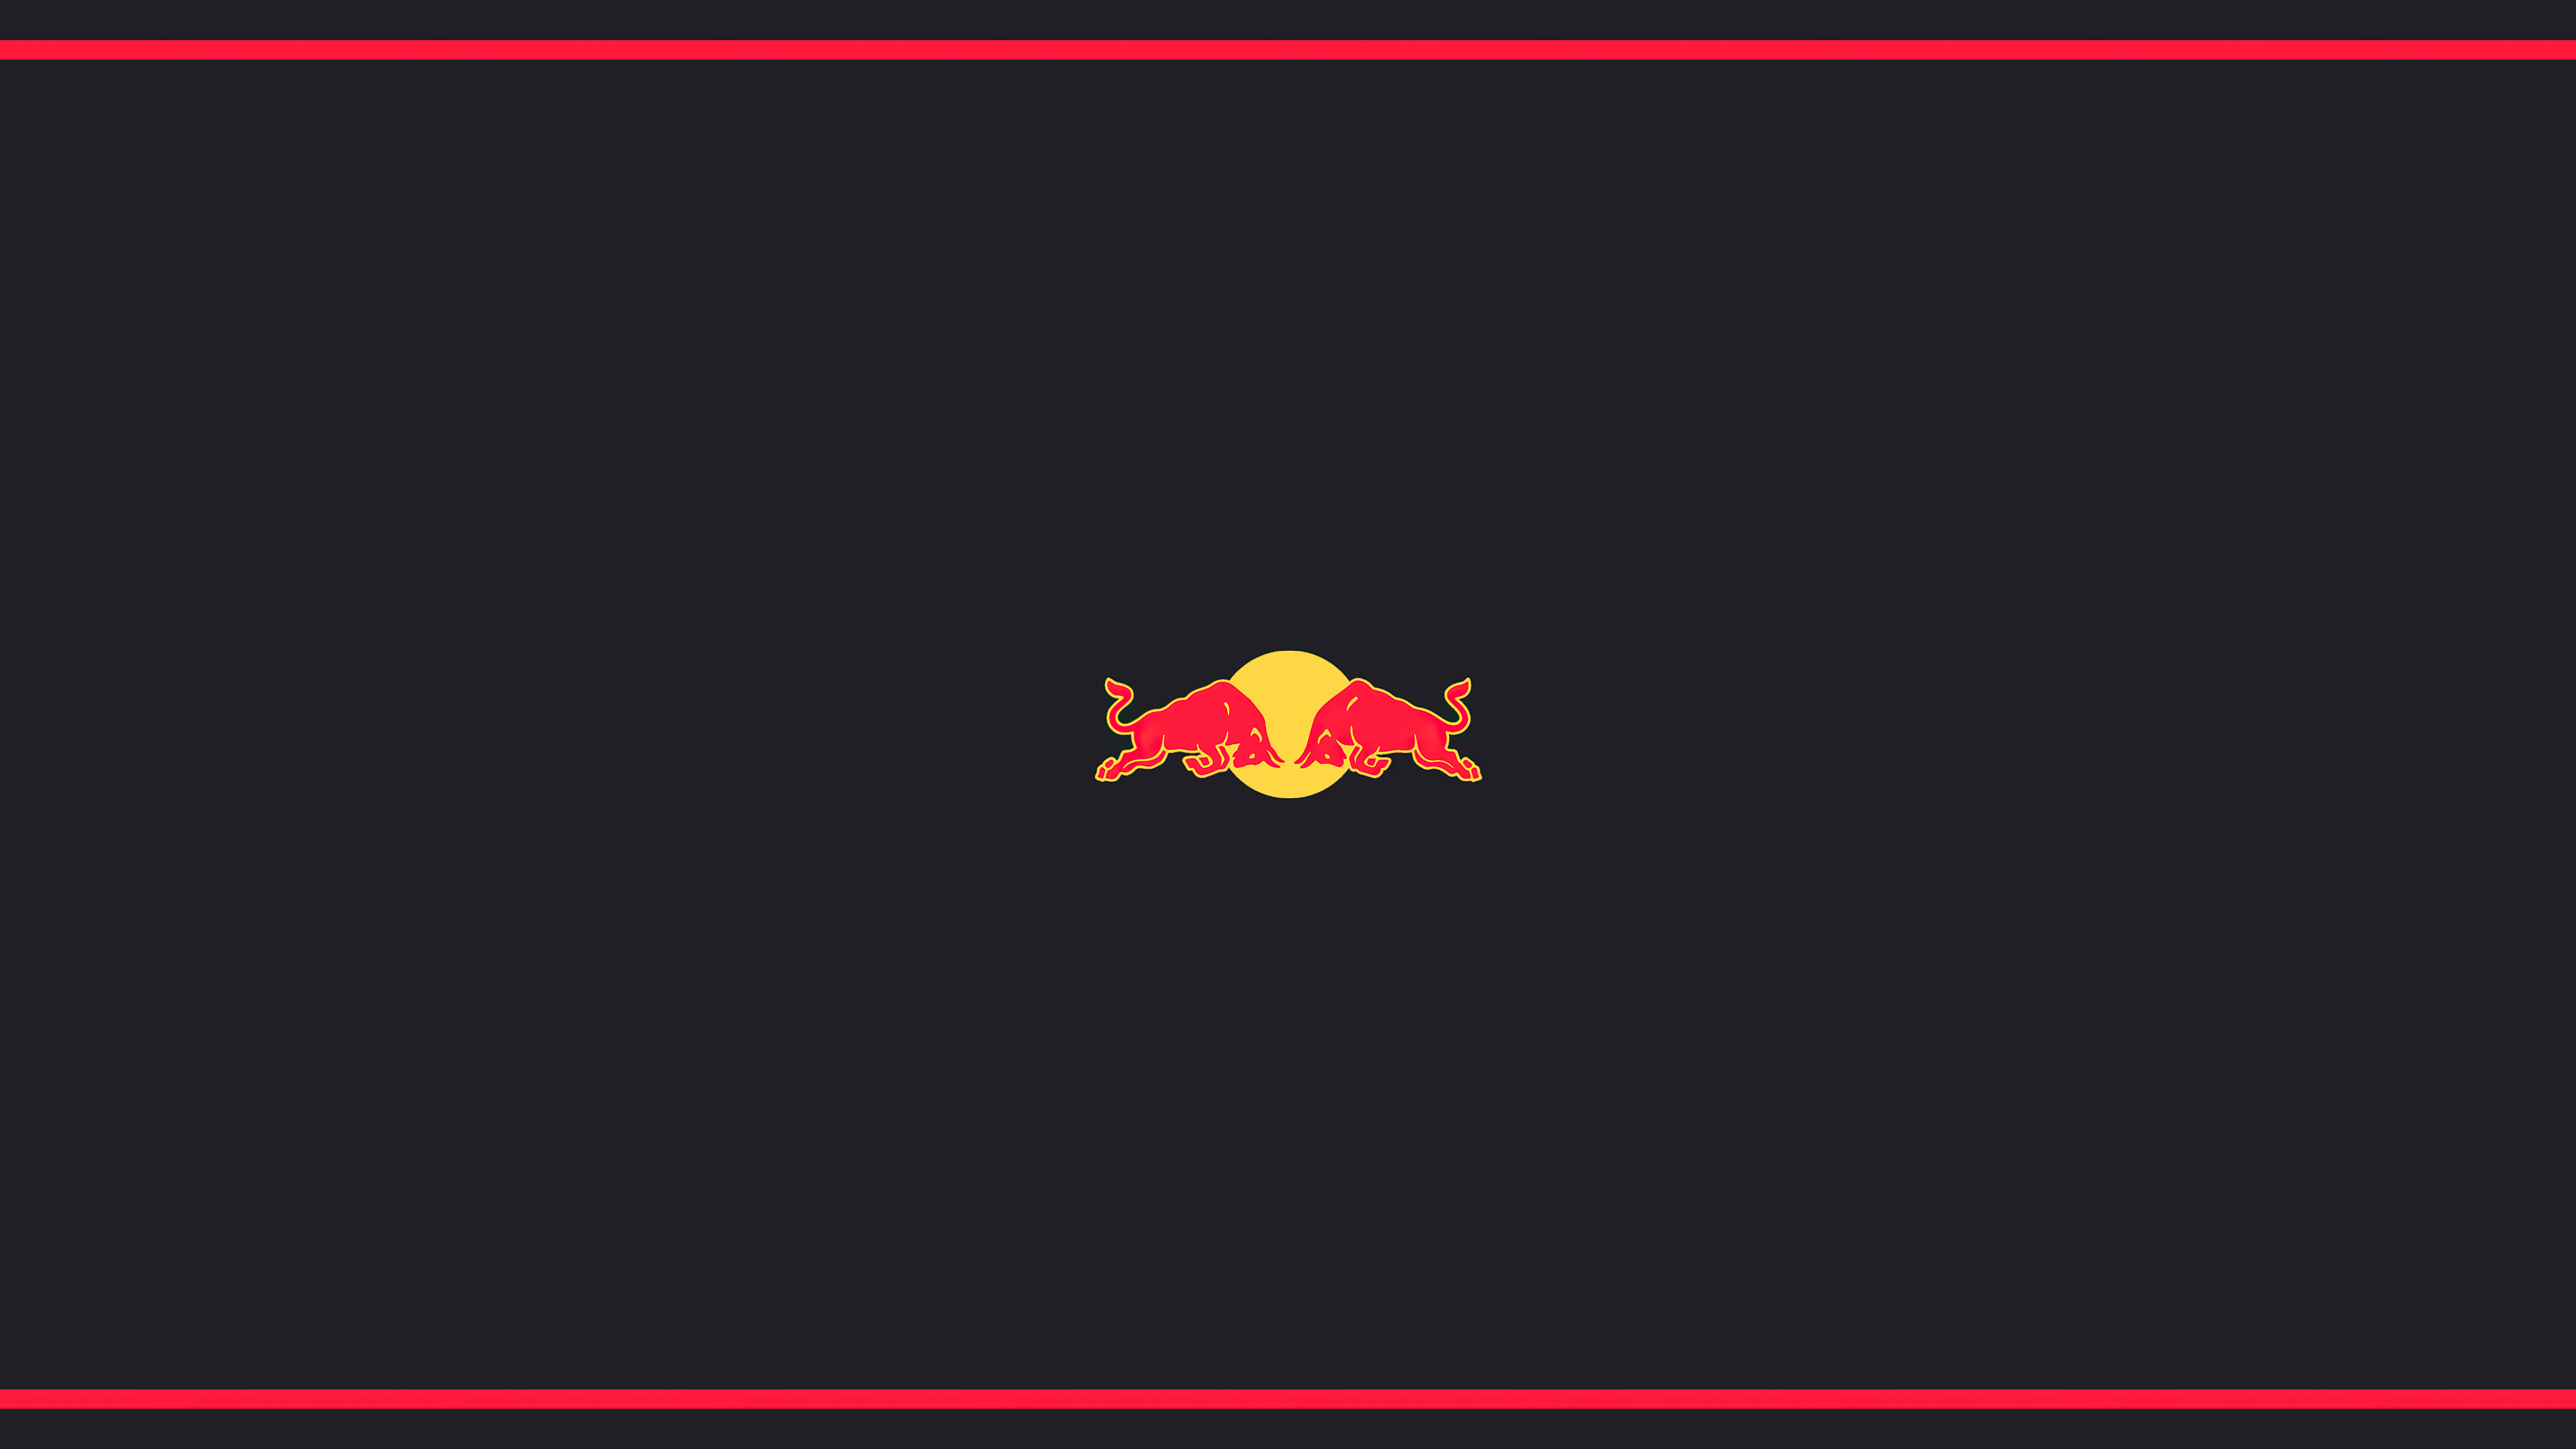 X redbull minimal logo k moto gx xperia zz pactgalaxy snote iinexus hd k wallpapers images backgrounds photos and pictures